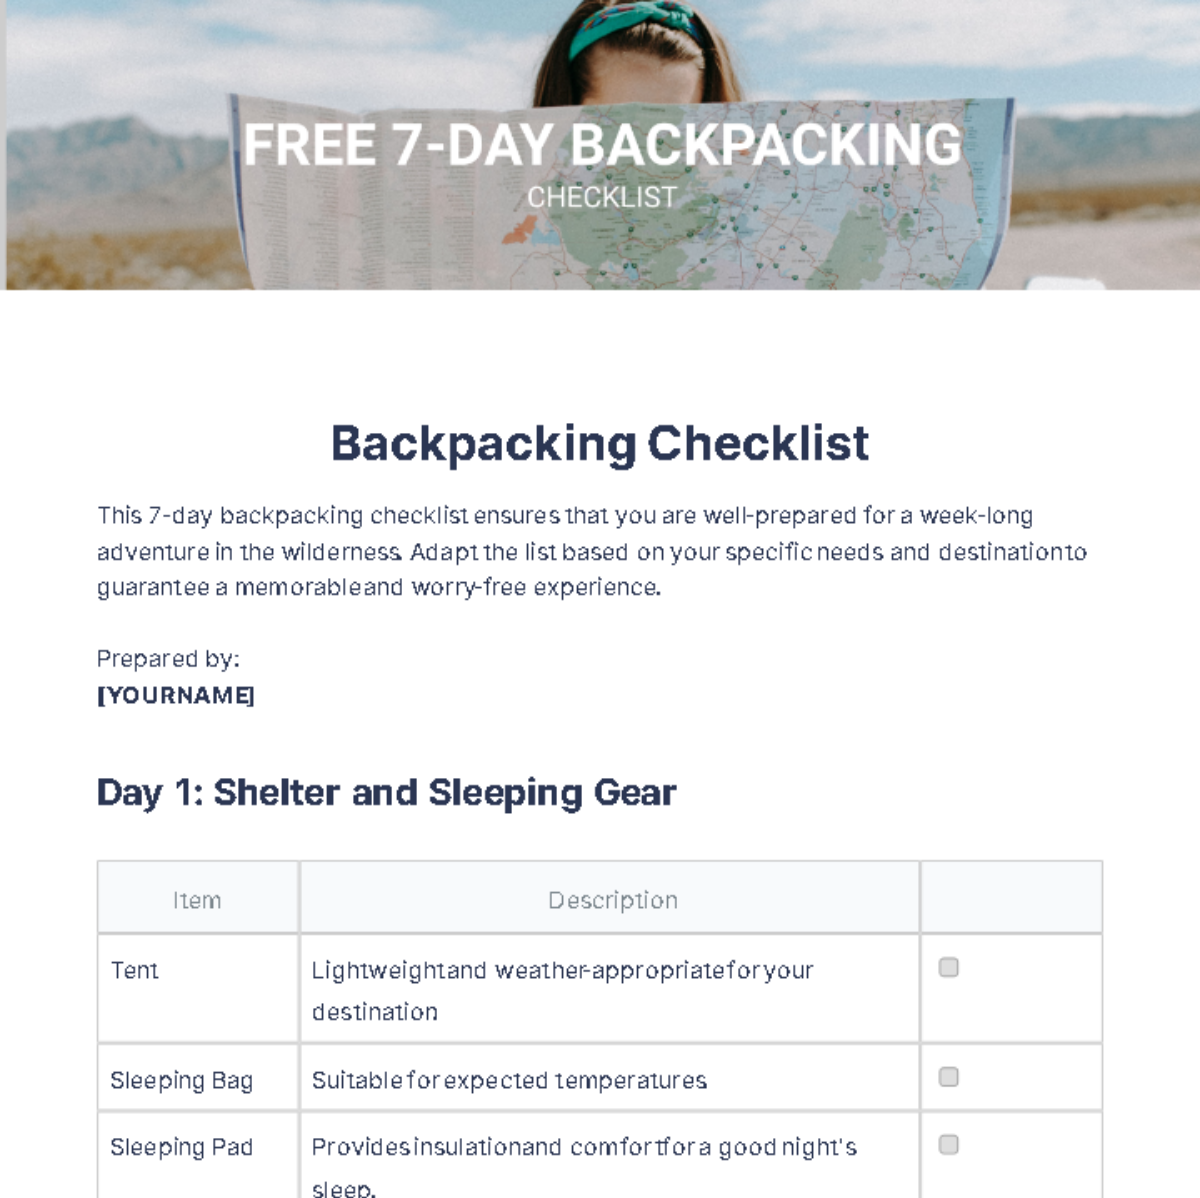 Free 7-Day Backpacking Checklist Template